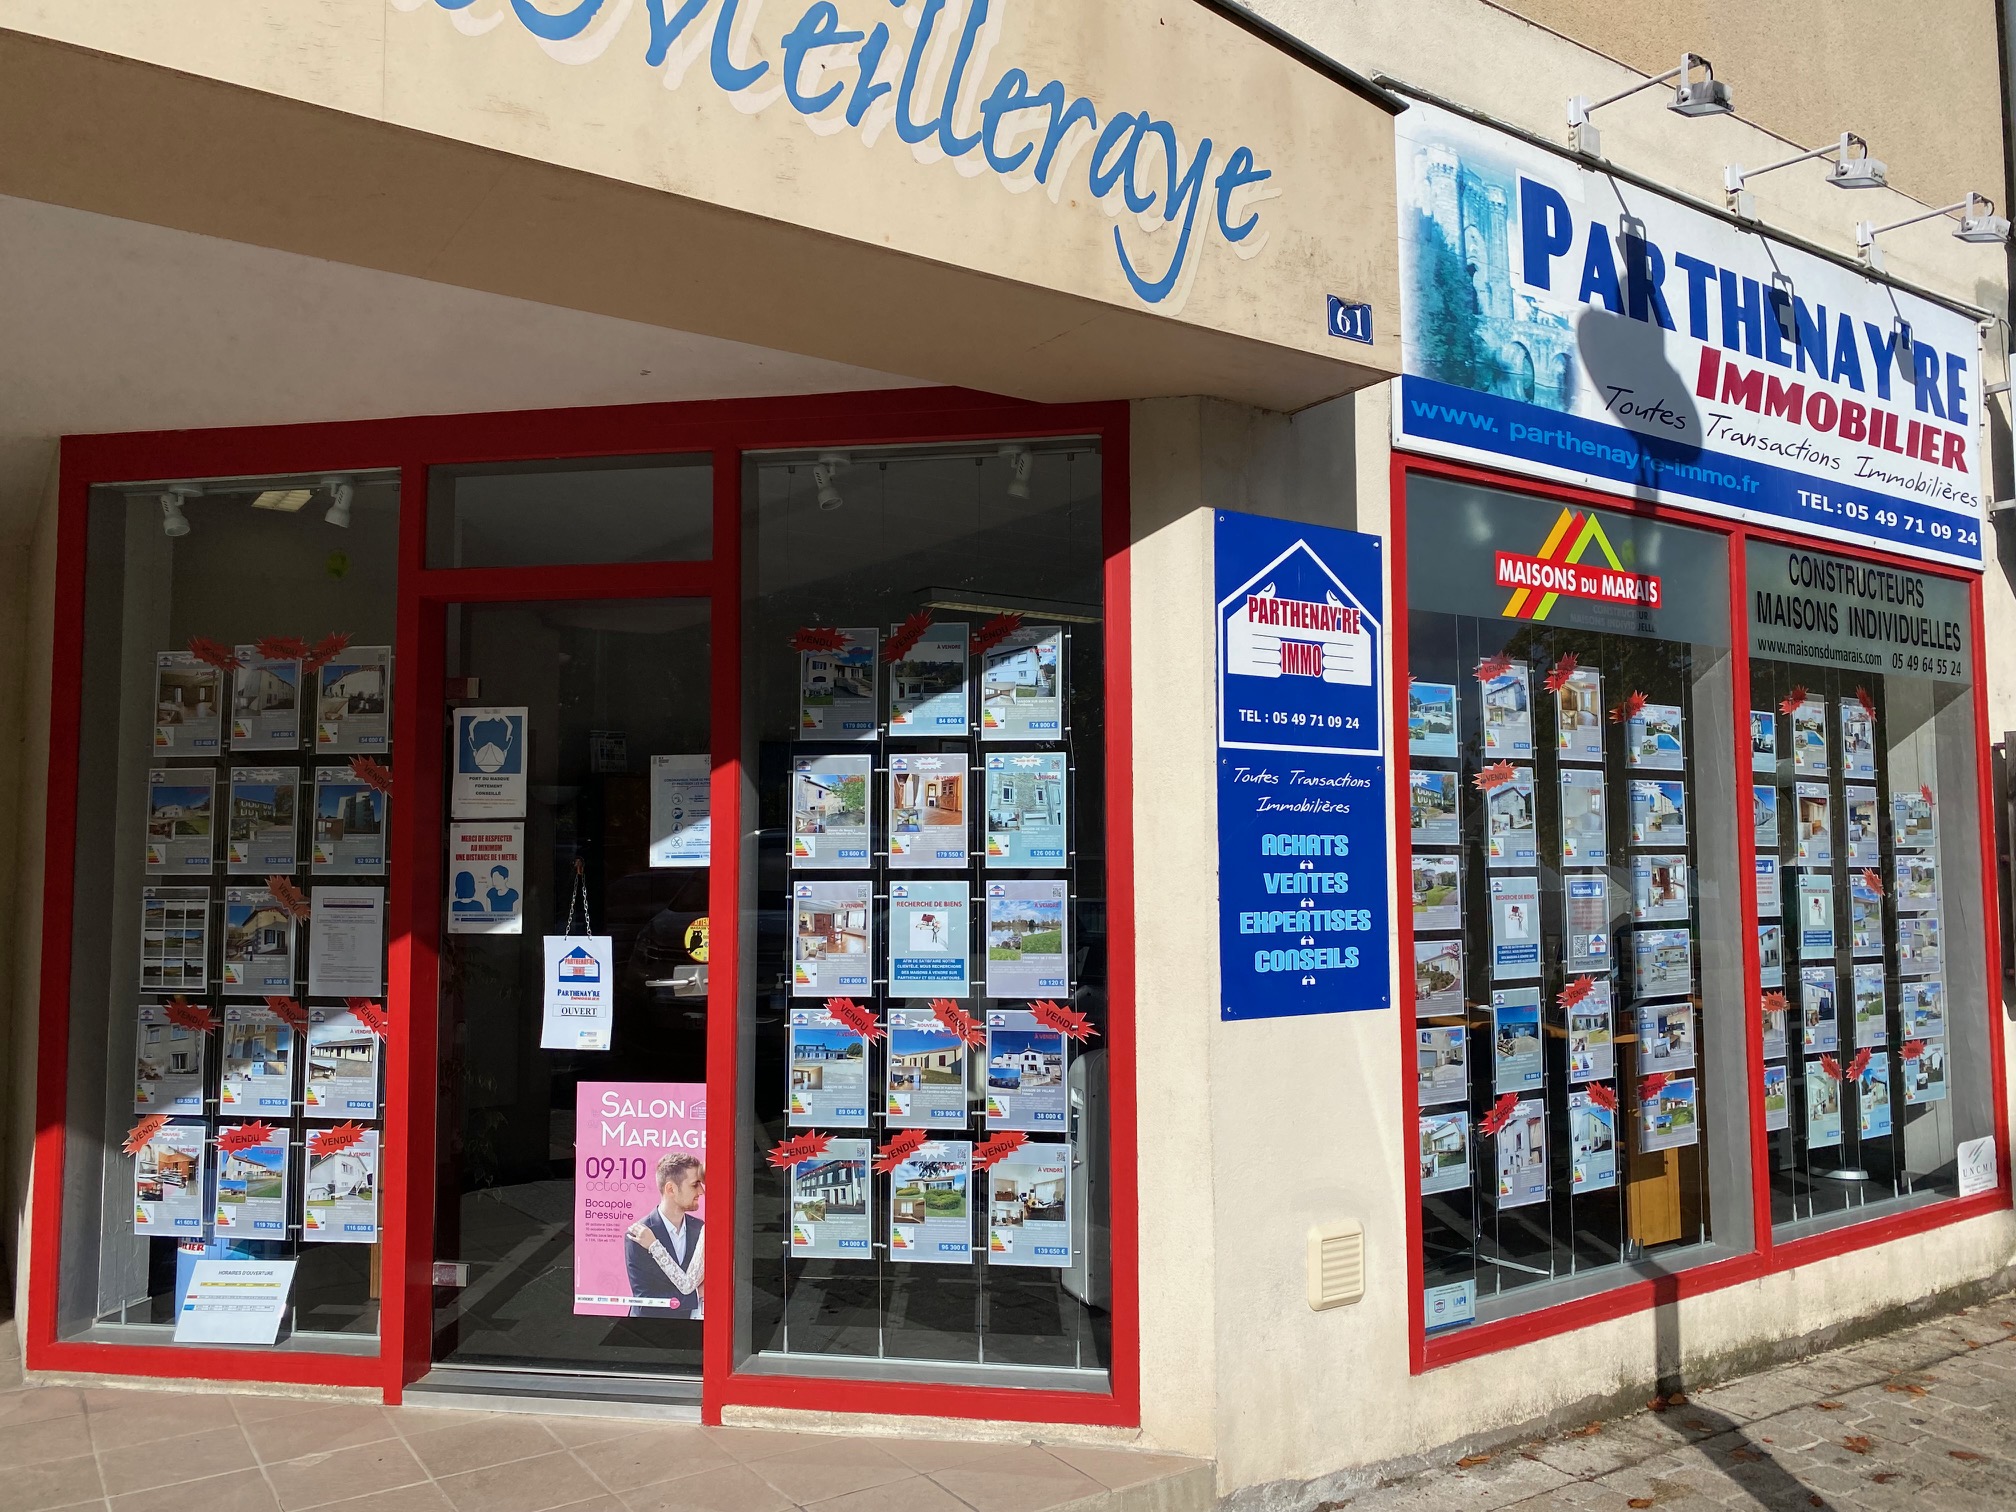 logo Parthenay're immobilier